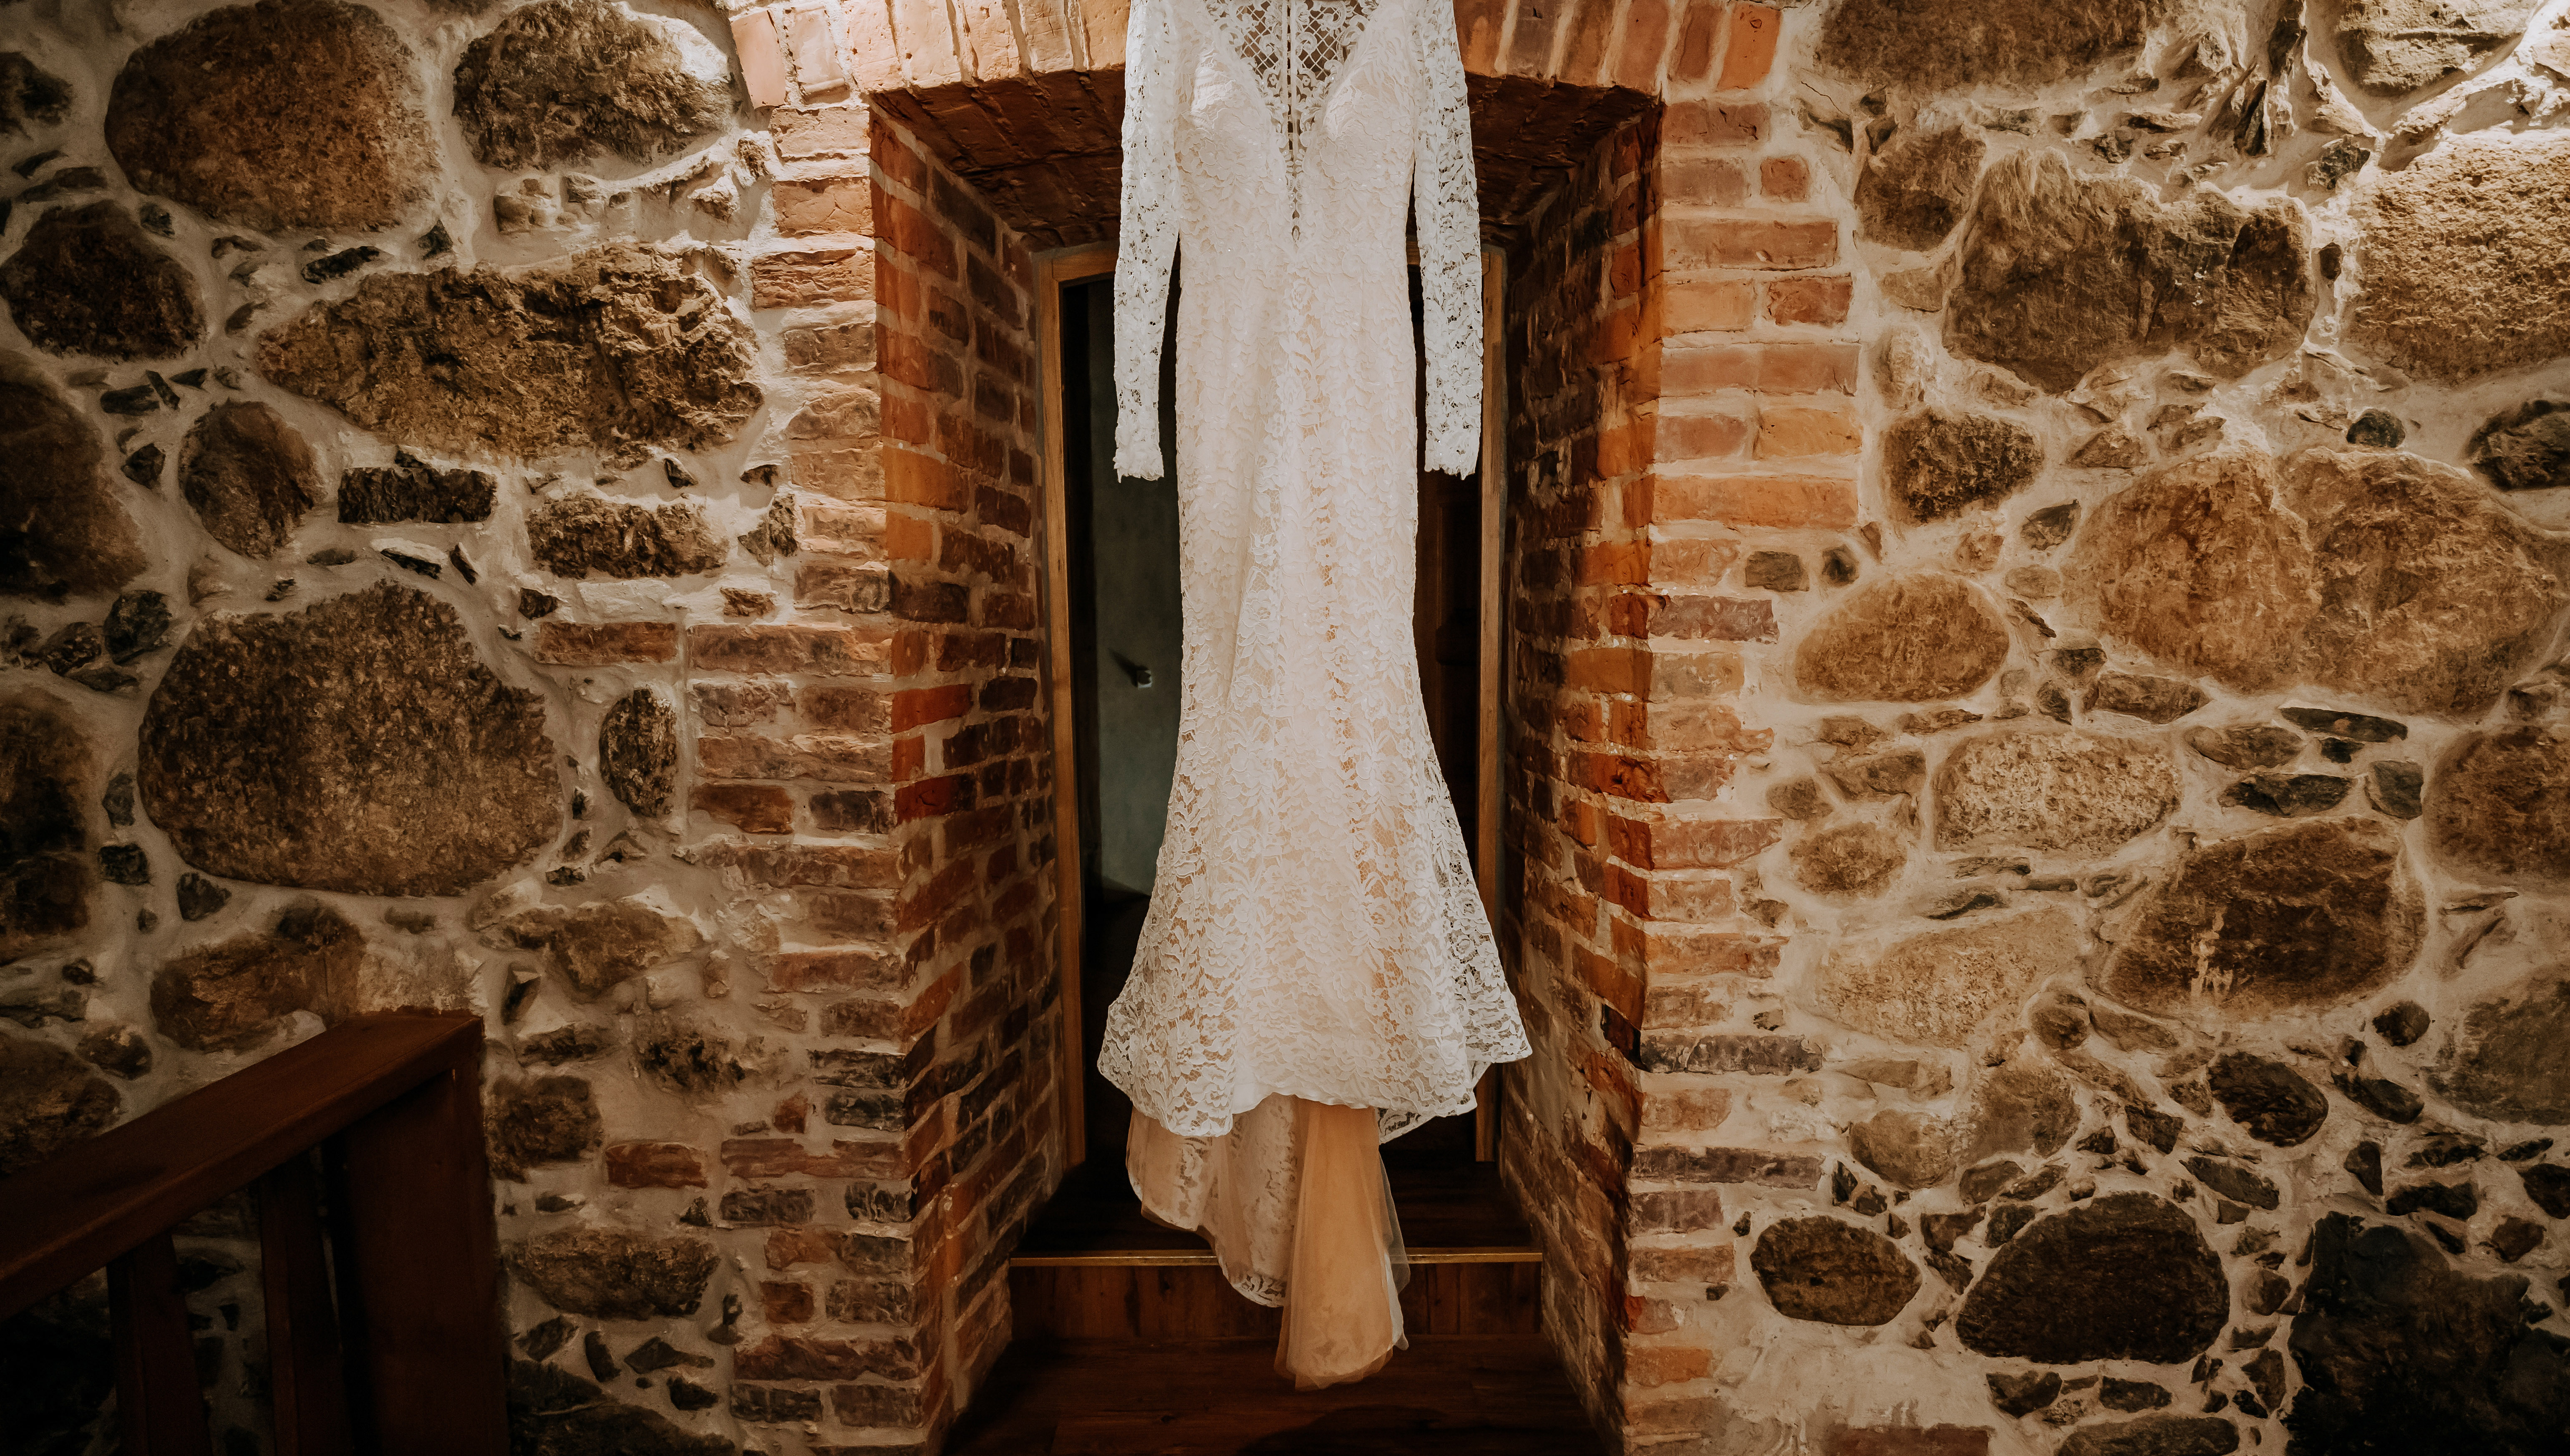 A wedding dress hanging in front of a stone wall | Source: Shutterstock